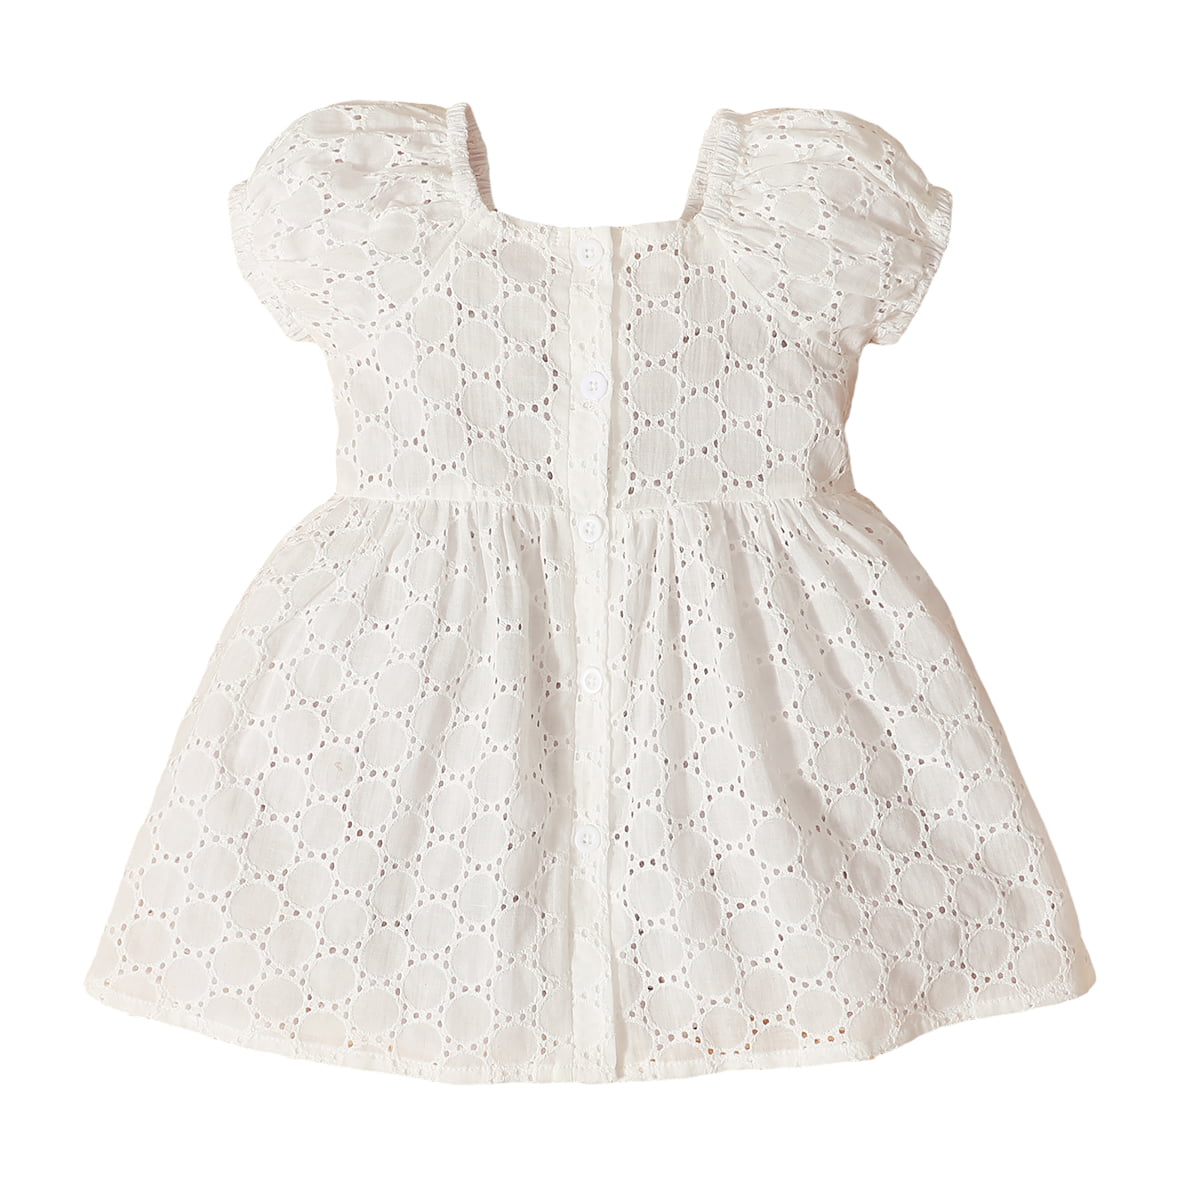 Mothercare 12-18 month girls summer dress white and blue 